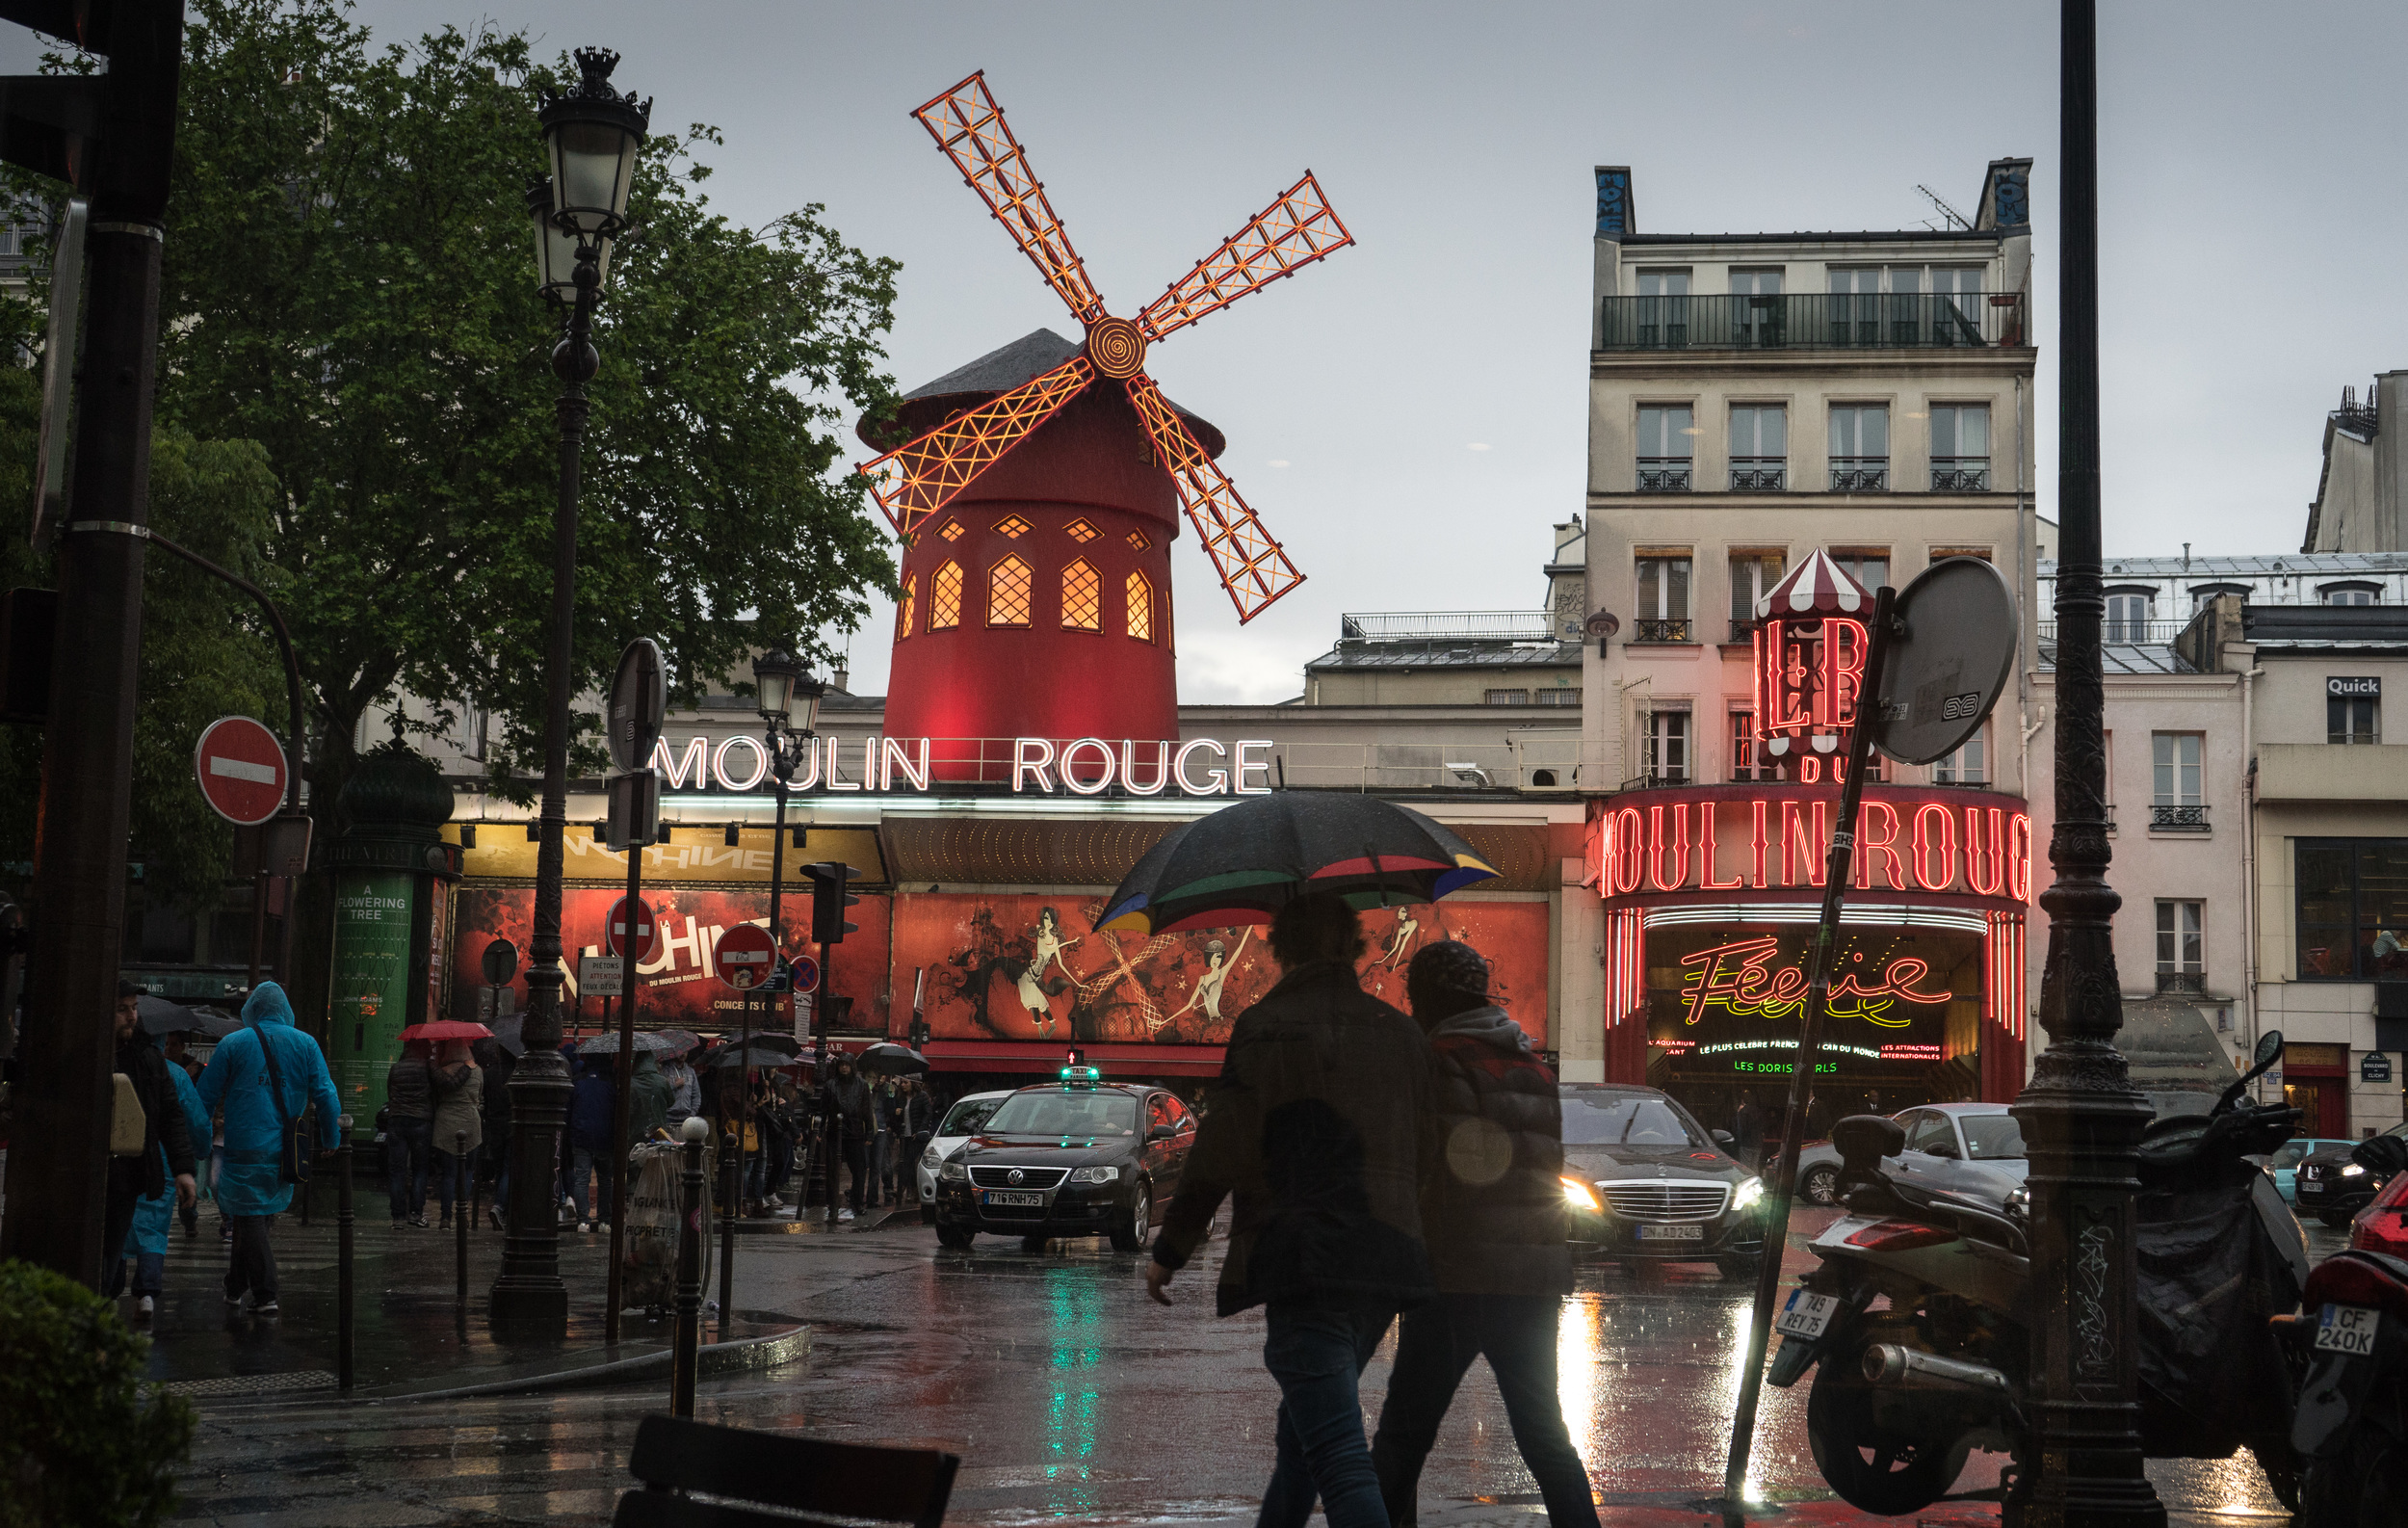 Rain at Moulin Rouge